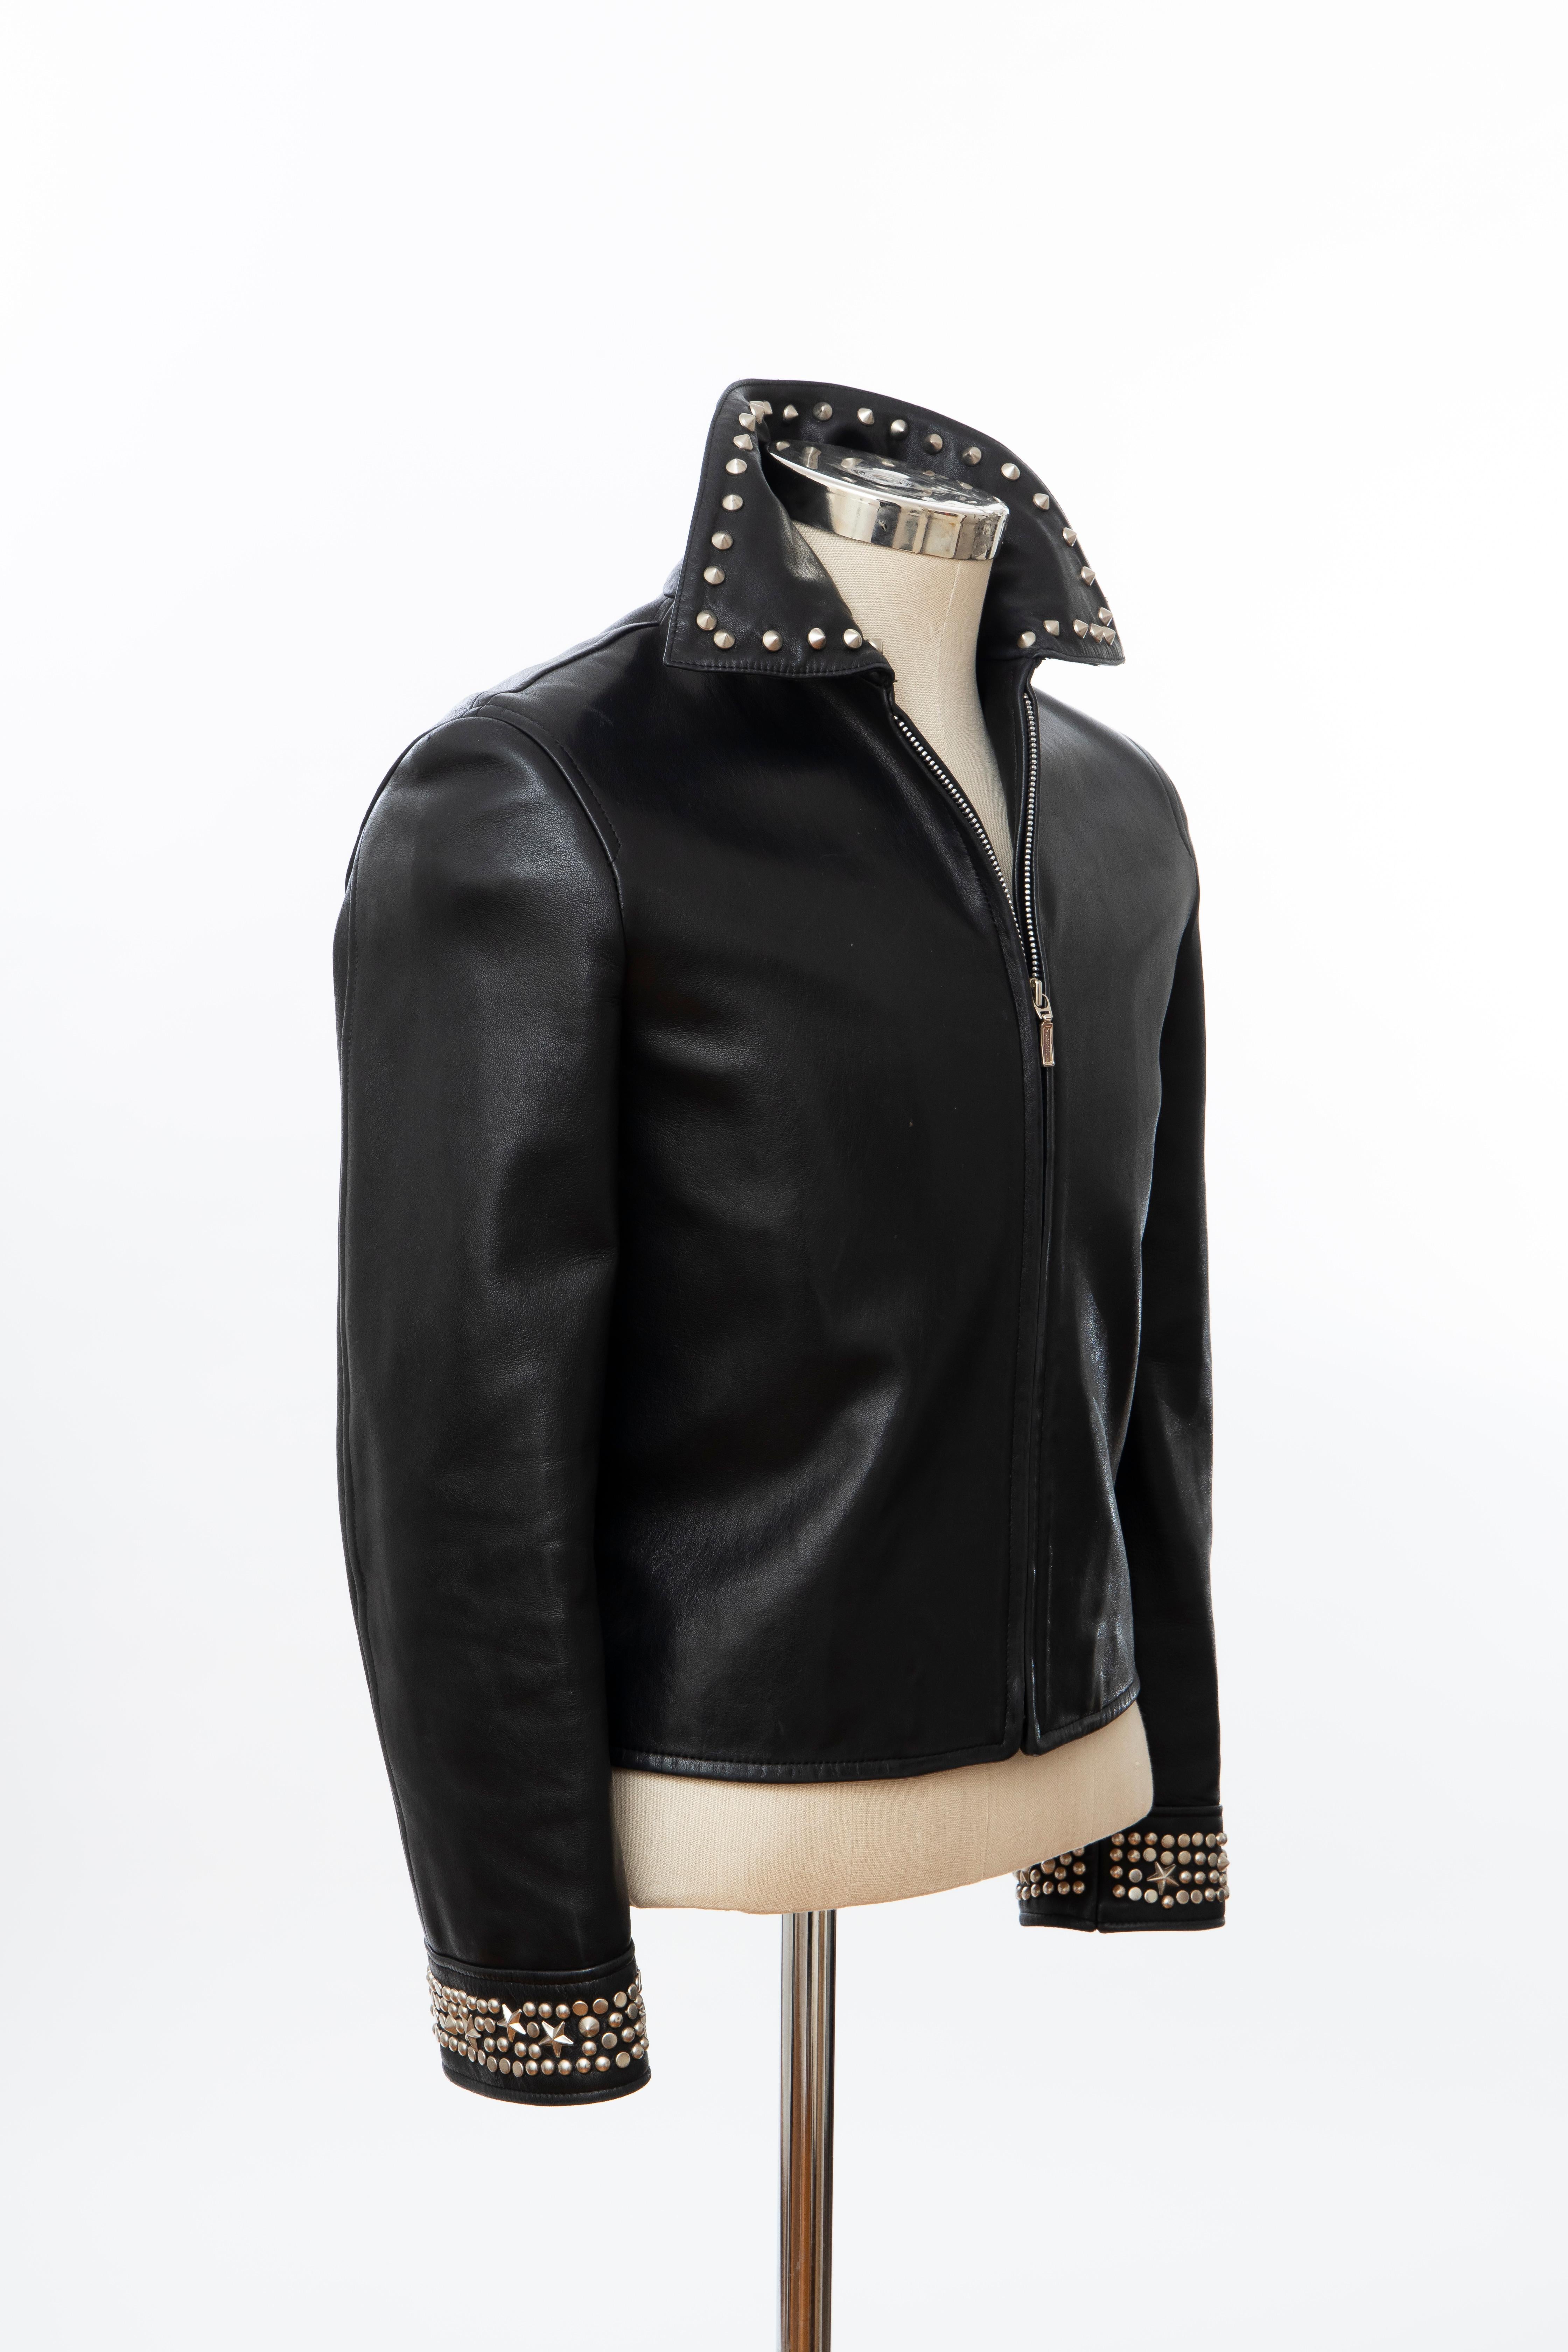 Gianni Versace Black Leather Jacket Pewter Stud Collar and Cuffs 